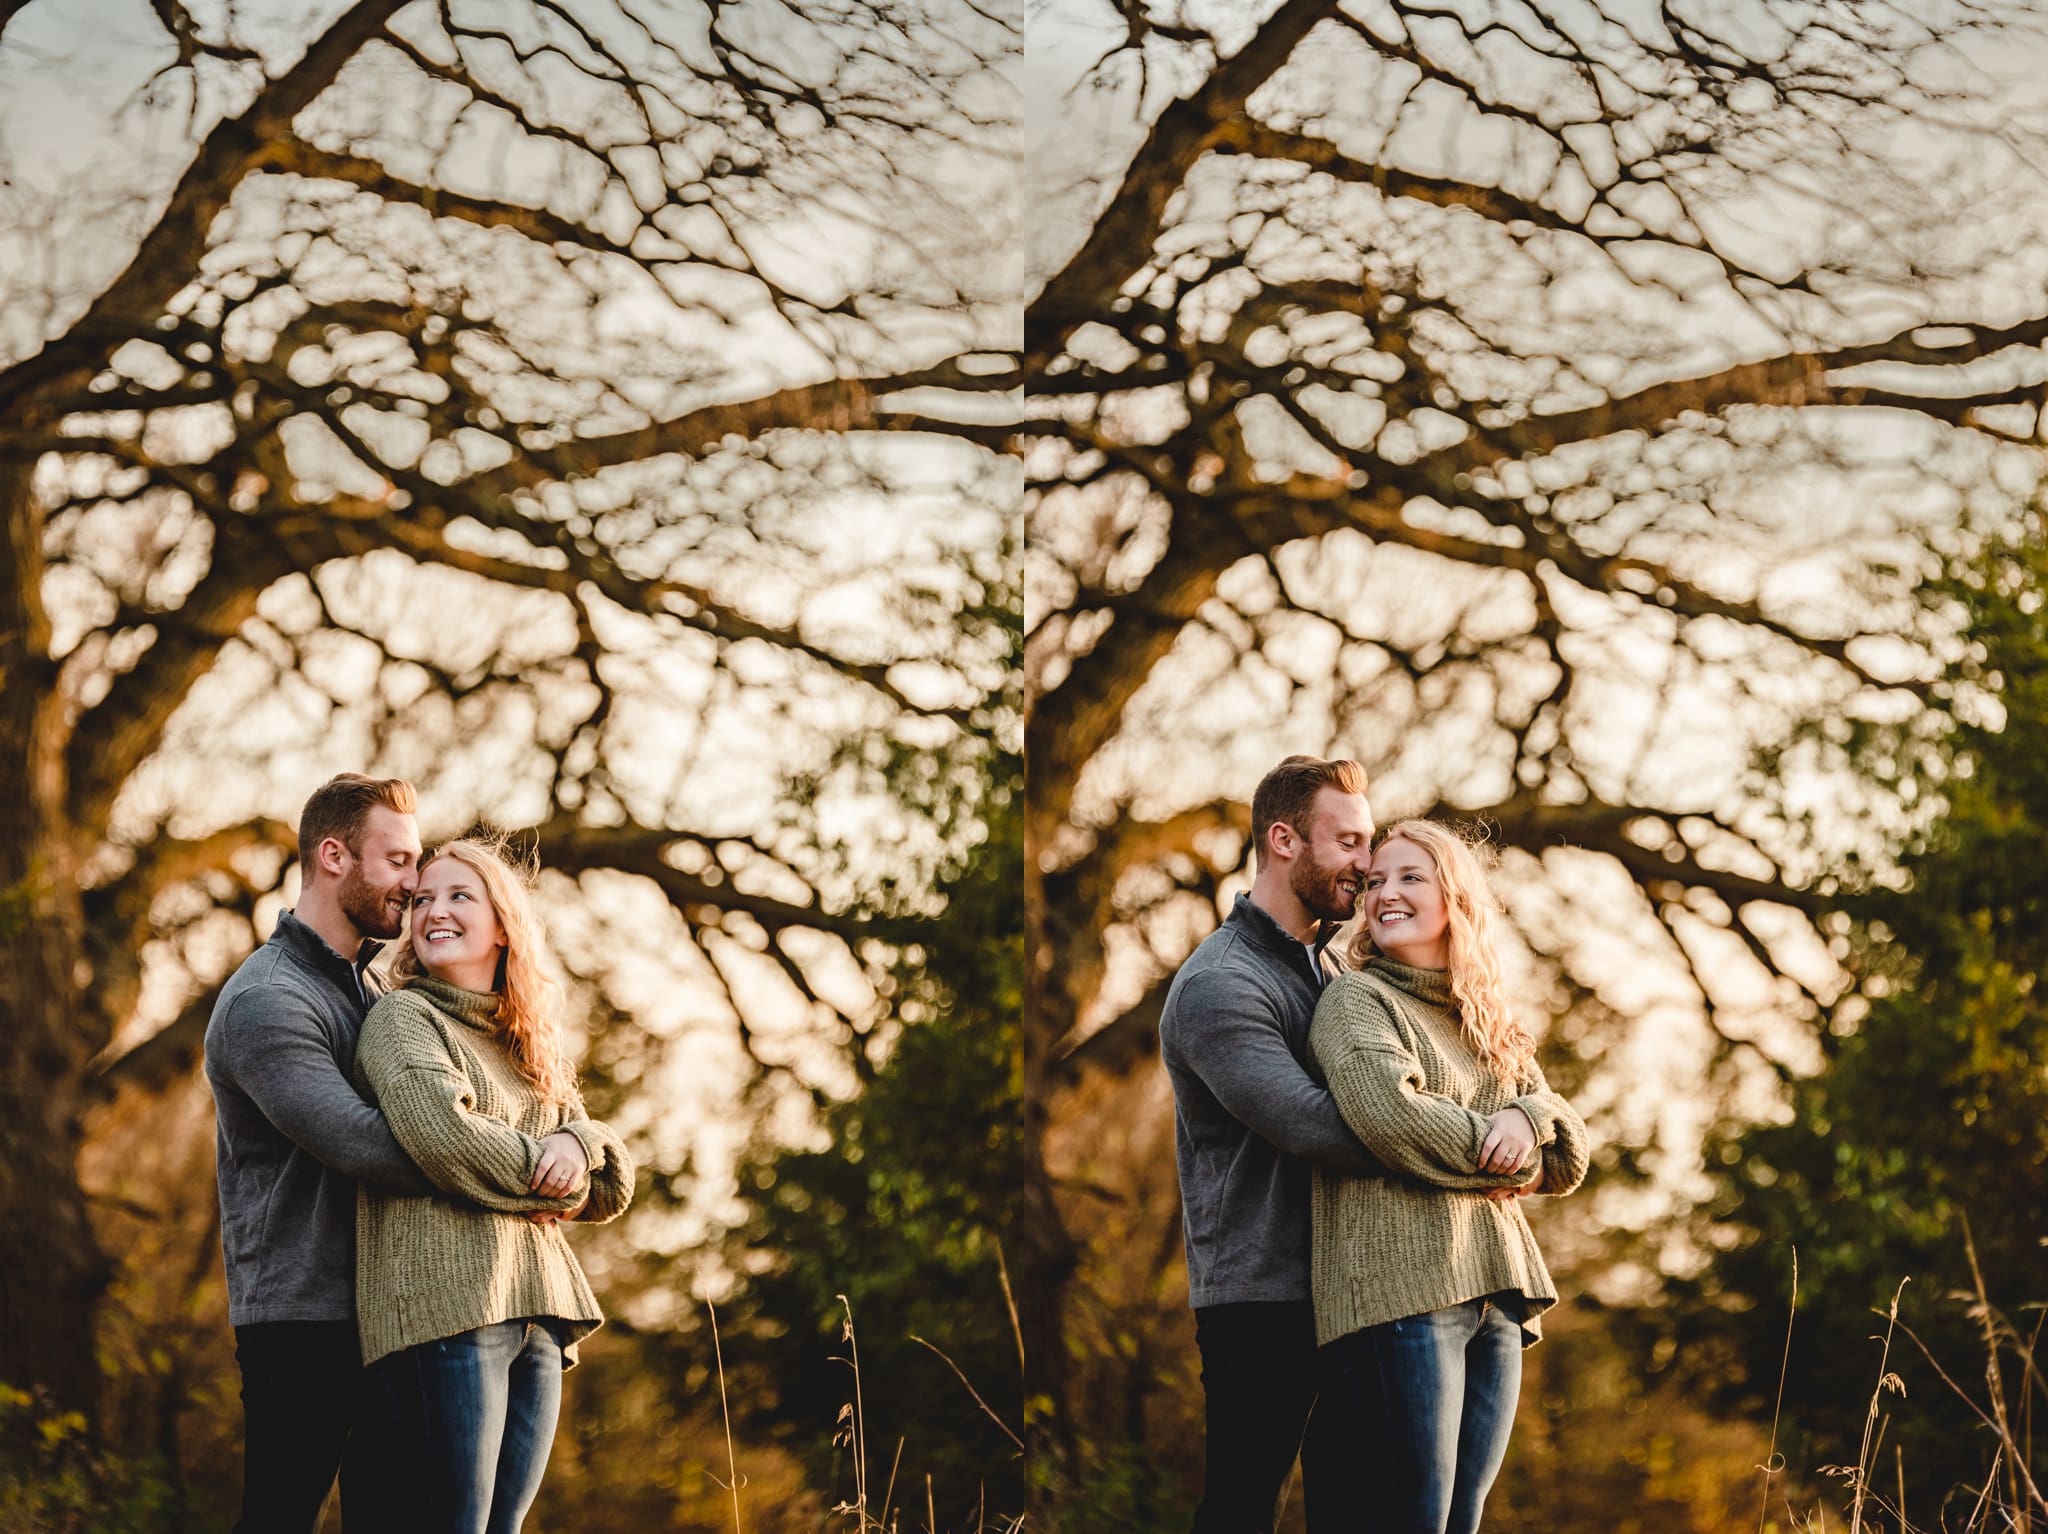 woman leaning on fiance from behind engagement photo poses